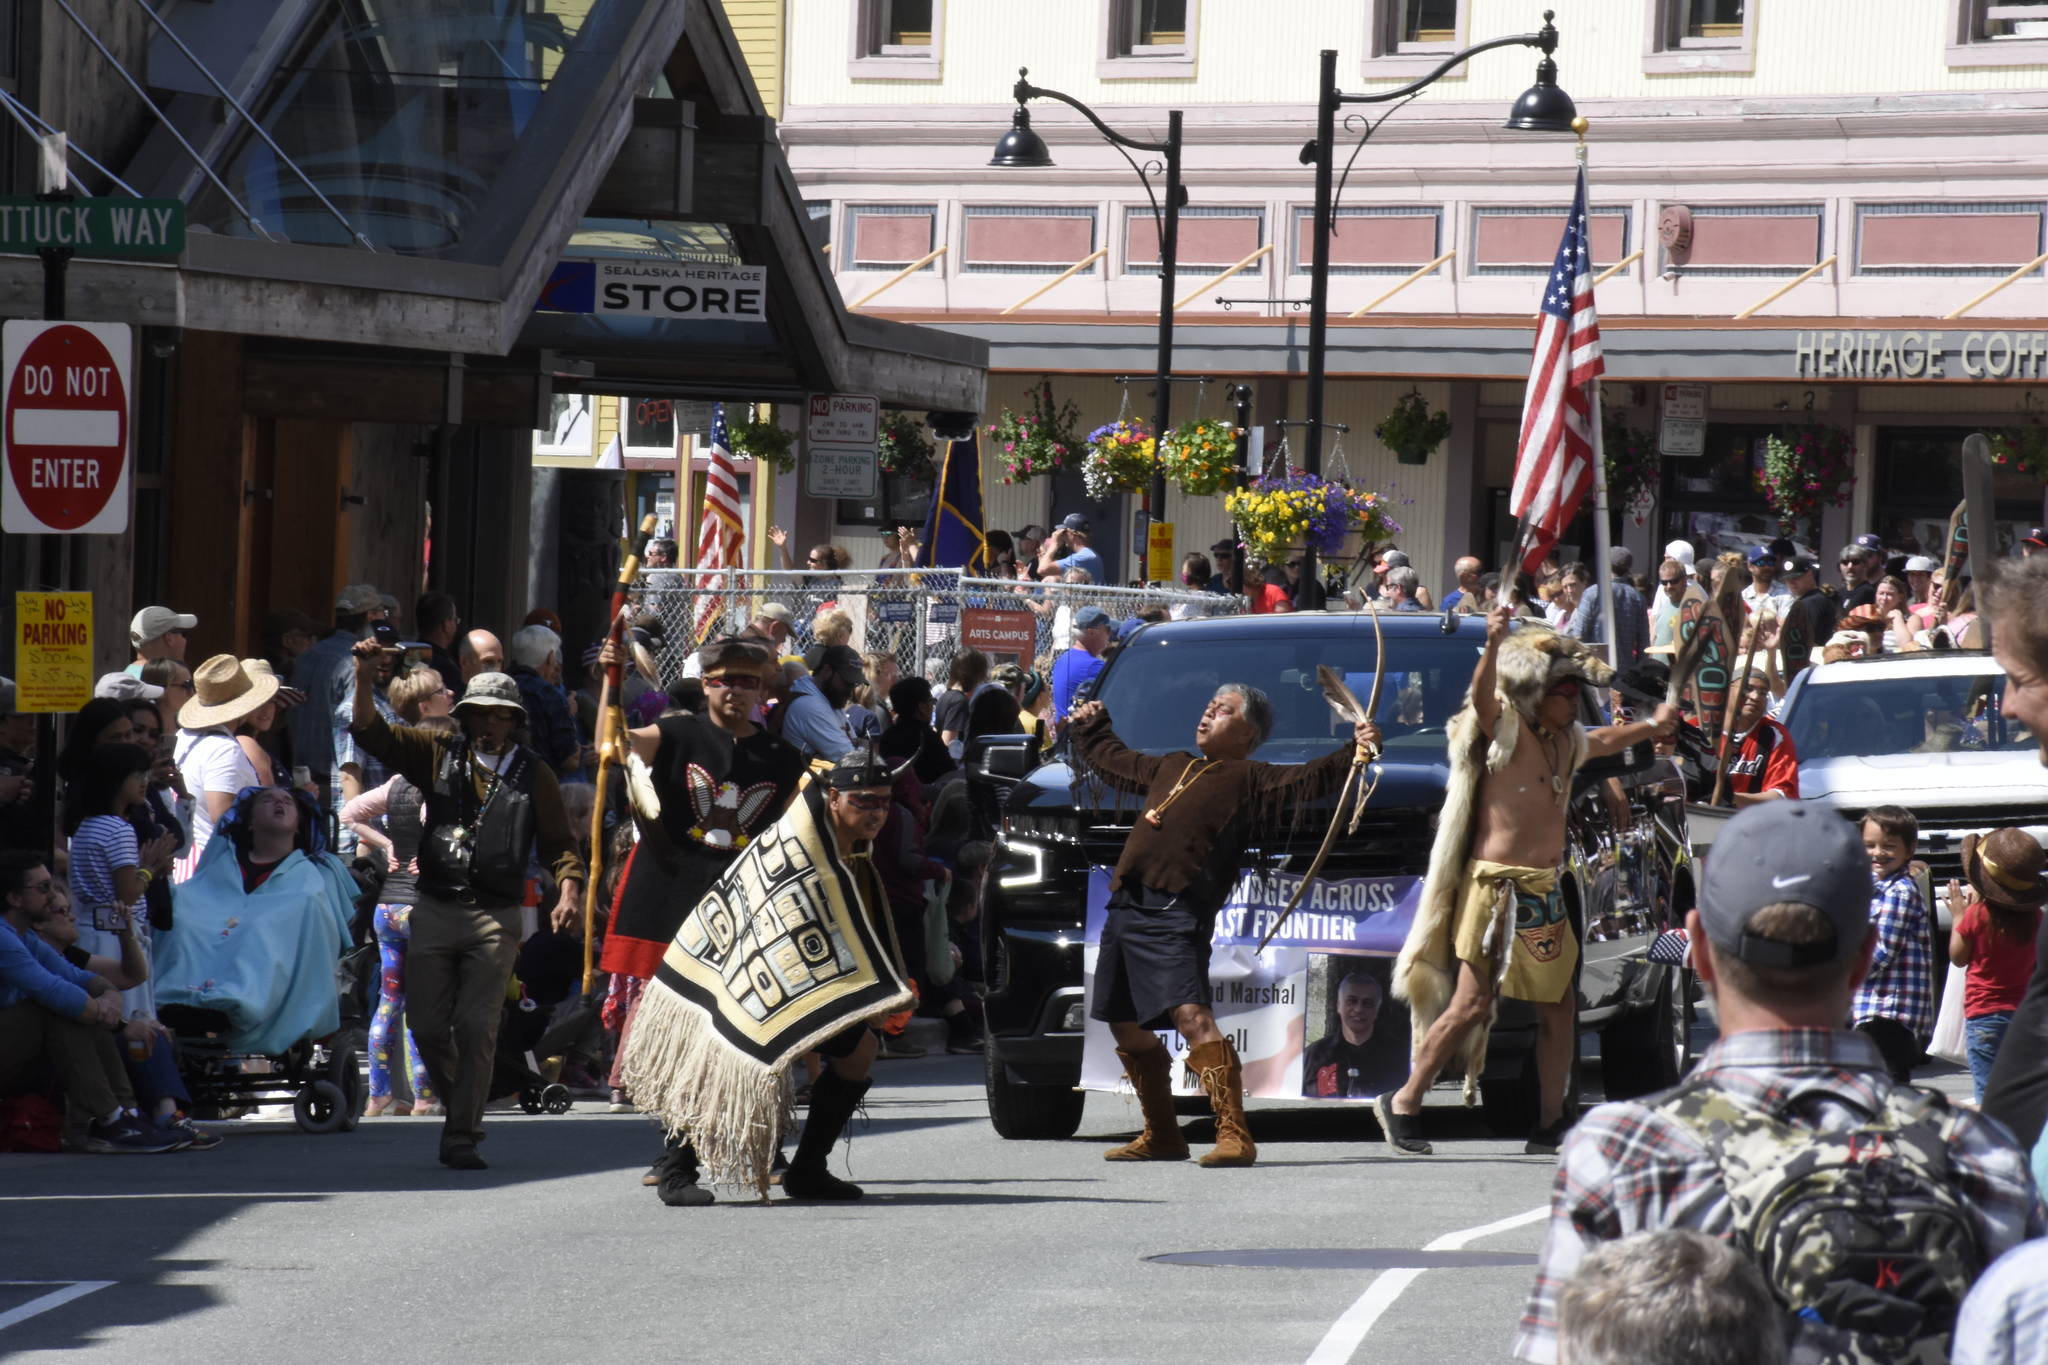 The Juneau Fourth of July parade makes its way through downtown Juneau. (Peter Segall / Juneau Empire)
The Juneau Fourth of July parade makes its way through downtown Juneau. (Peter Segall / Juneau Empire)